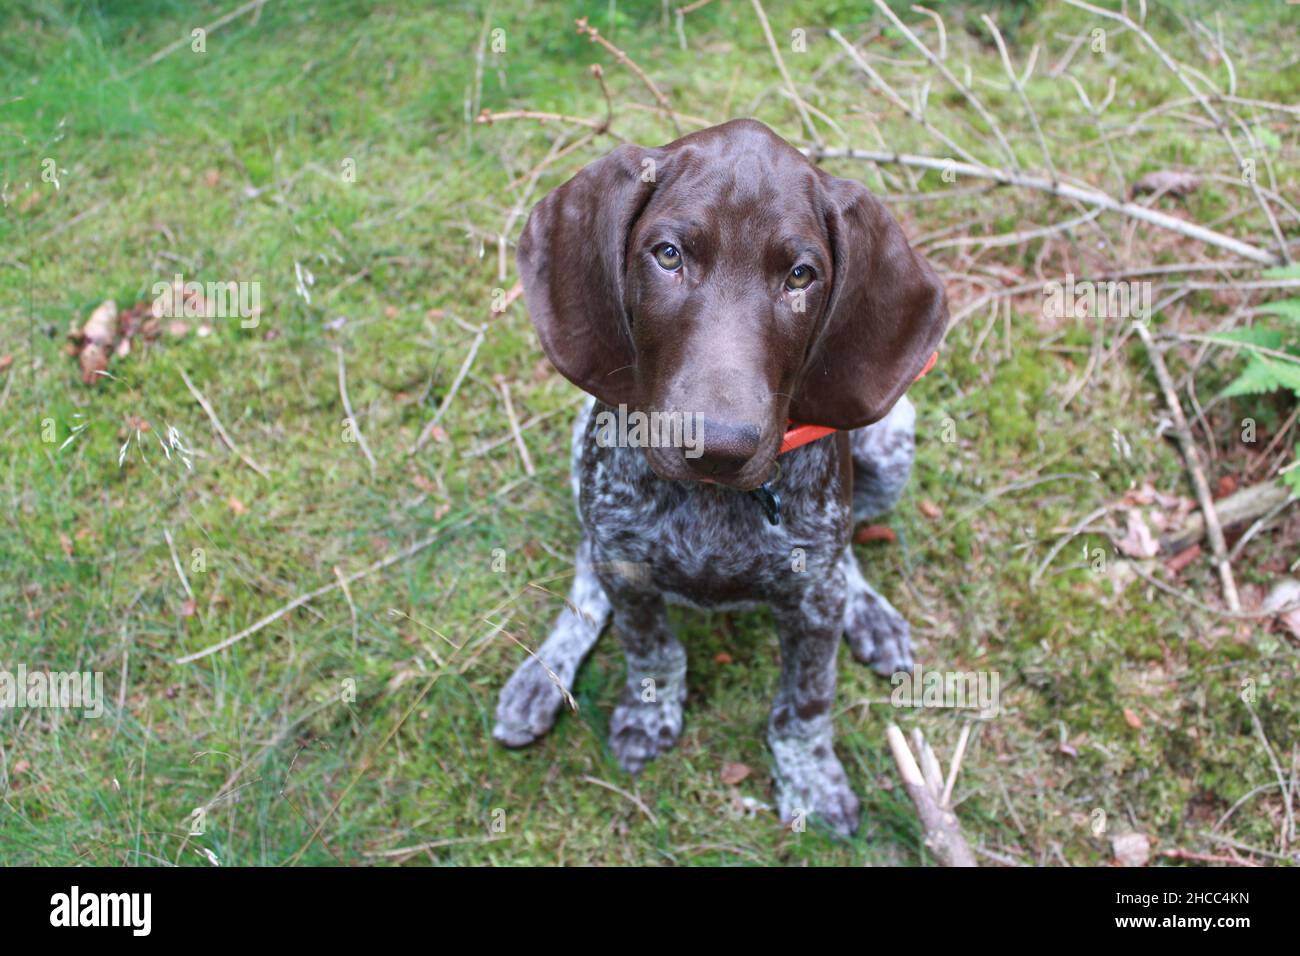 Puppy on a walk in forrest Stock Photo